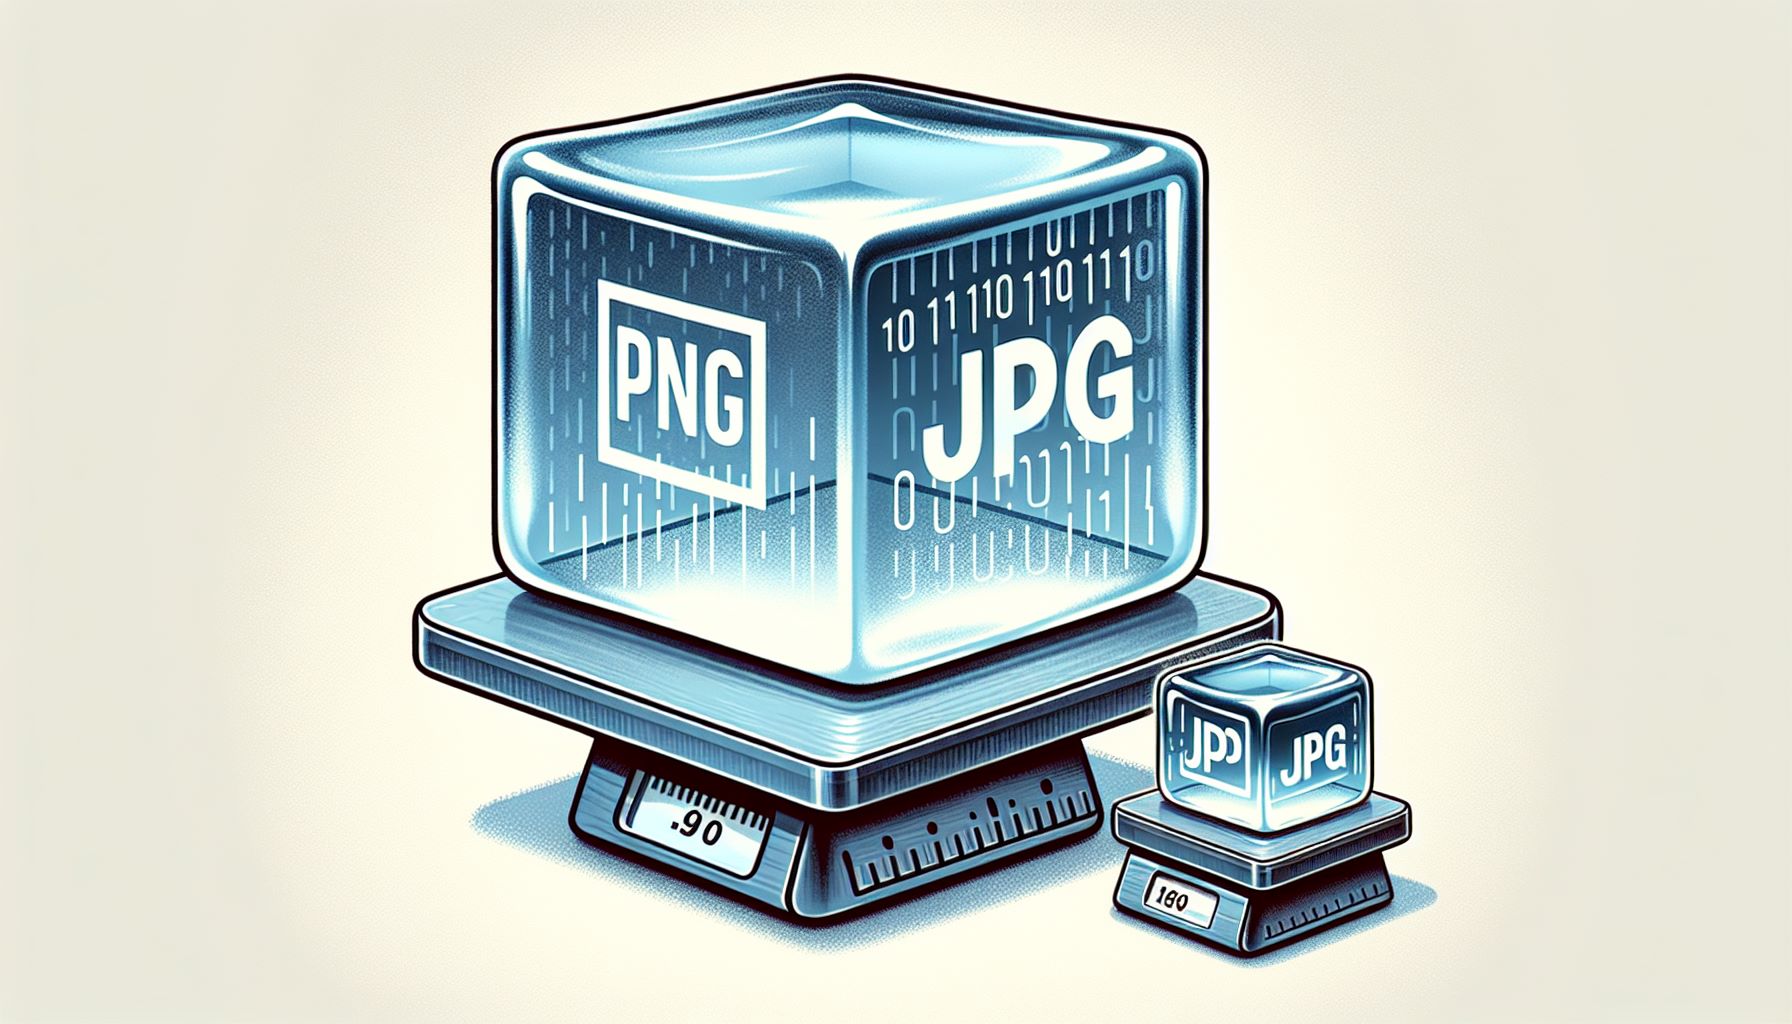 Comparison between PNG and JPG formats